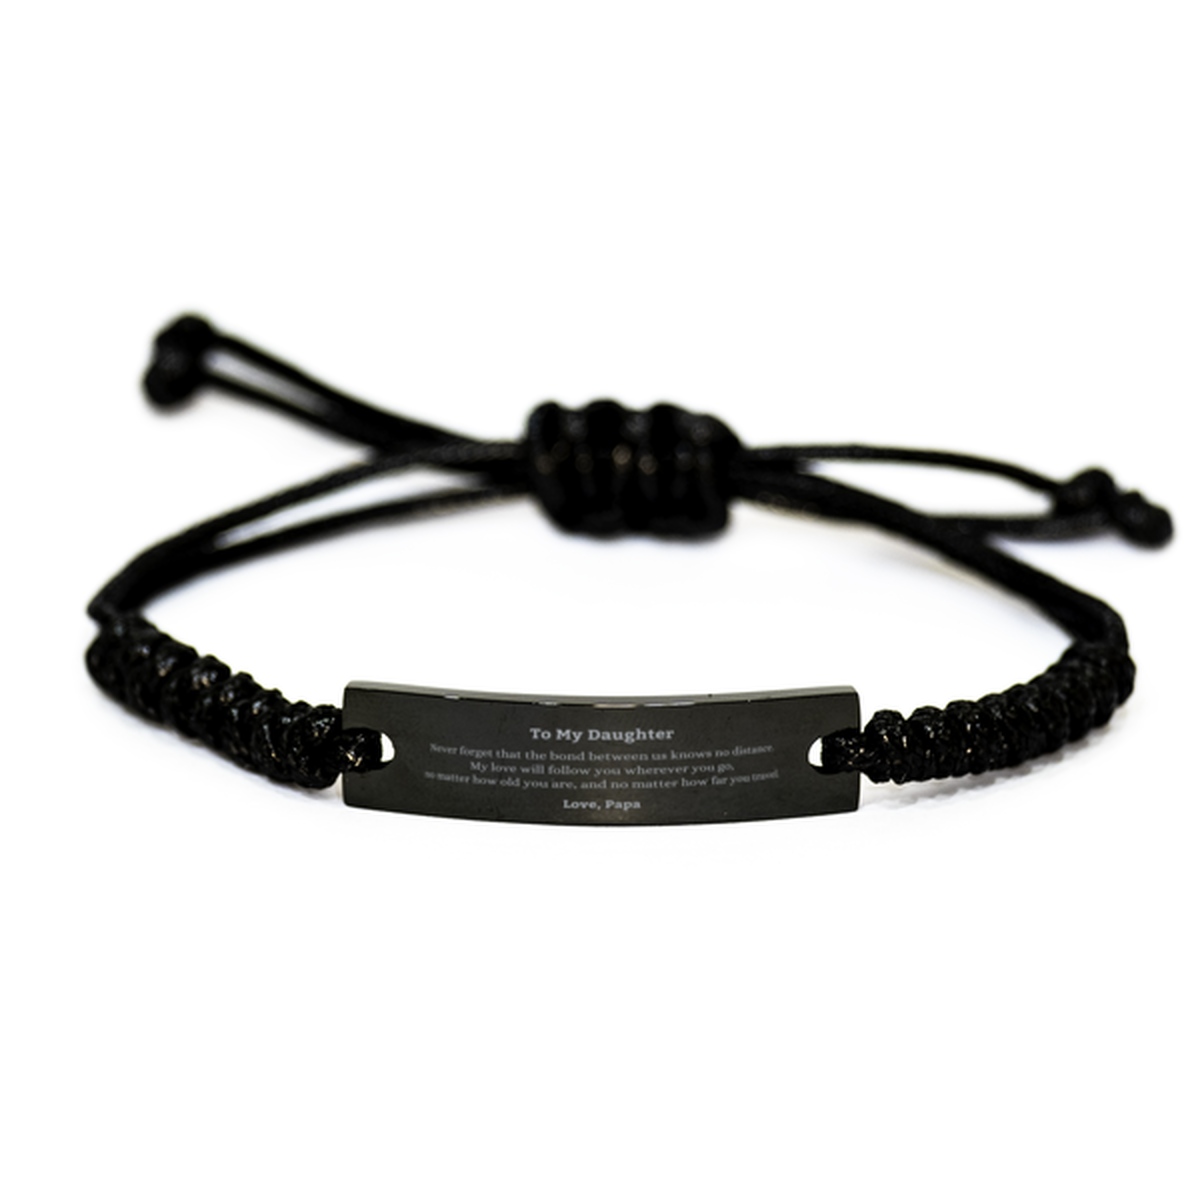 Daughter Birthday Gifts from Papa, Adjustable Black Rope Bracelet for Daughter Christmas Graduation Unique Gifts Daughter Never forget that the bond between us knows no distance. Love, Papa